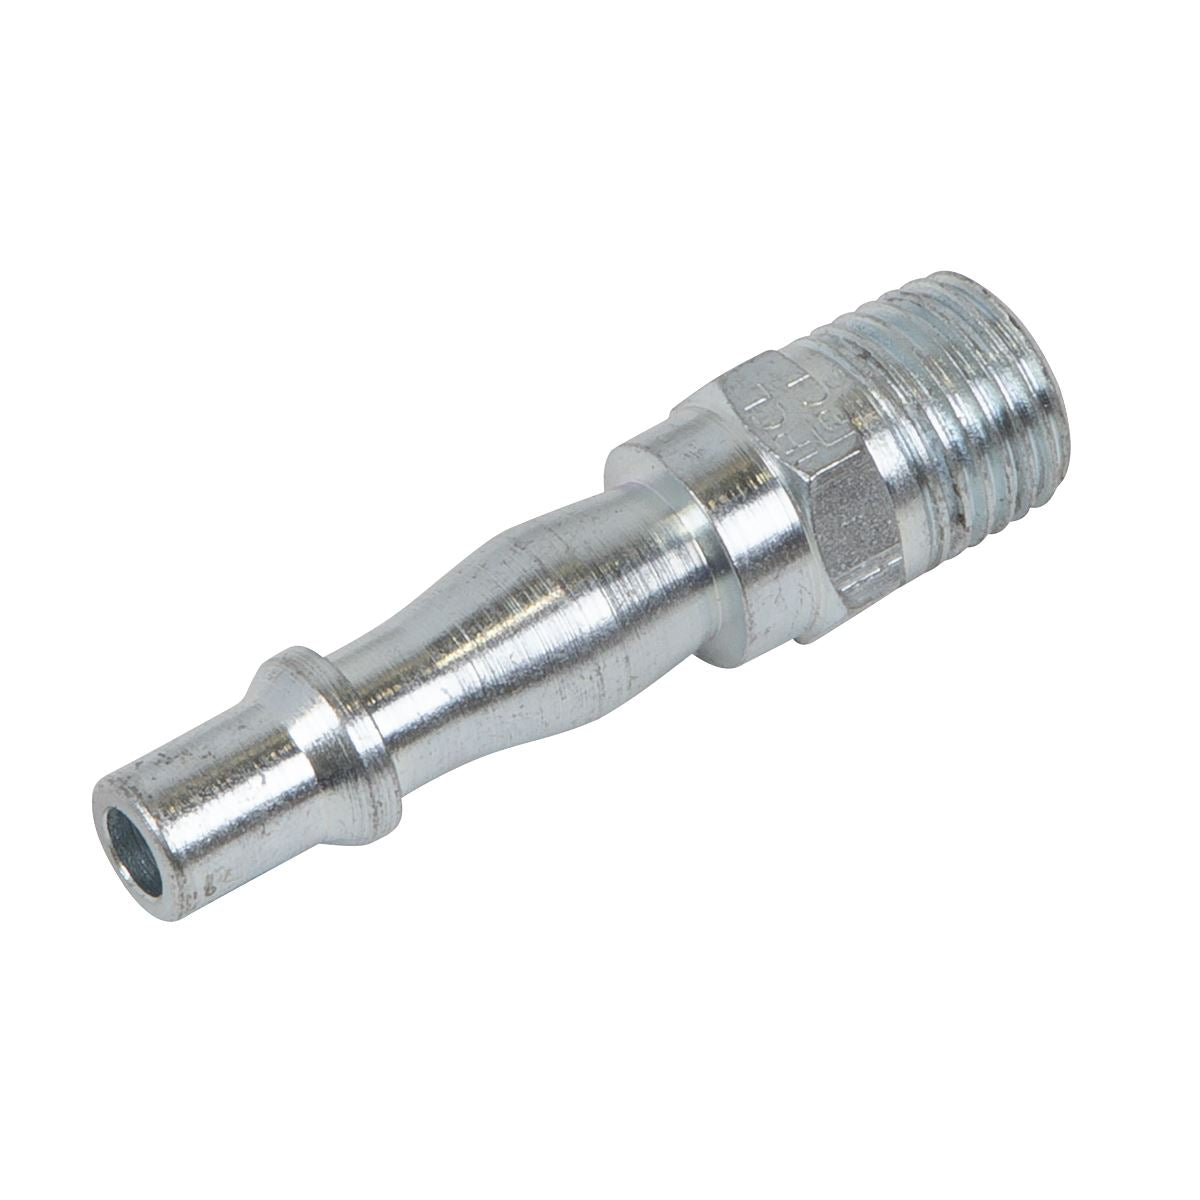 PCL Screwed PCL Safety Adaptor Male 1/4"BSPT